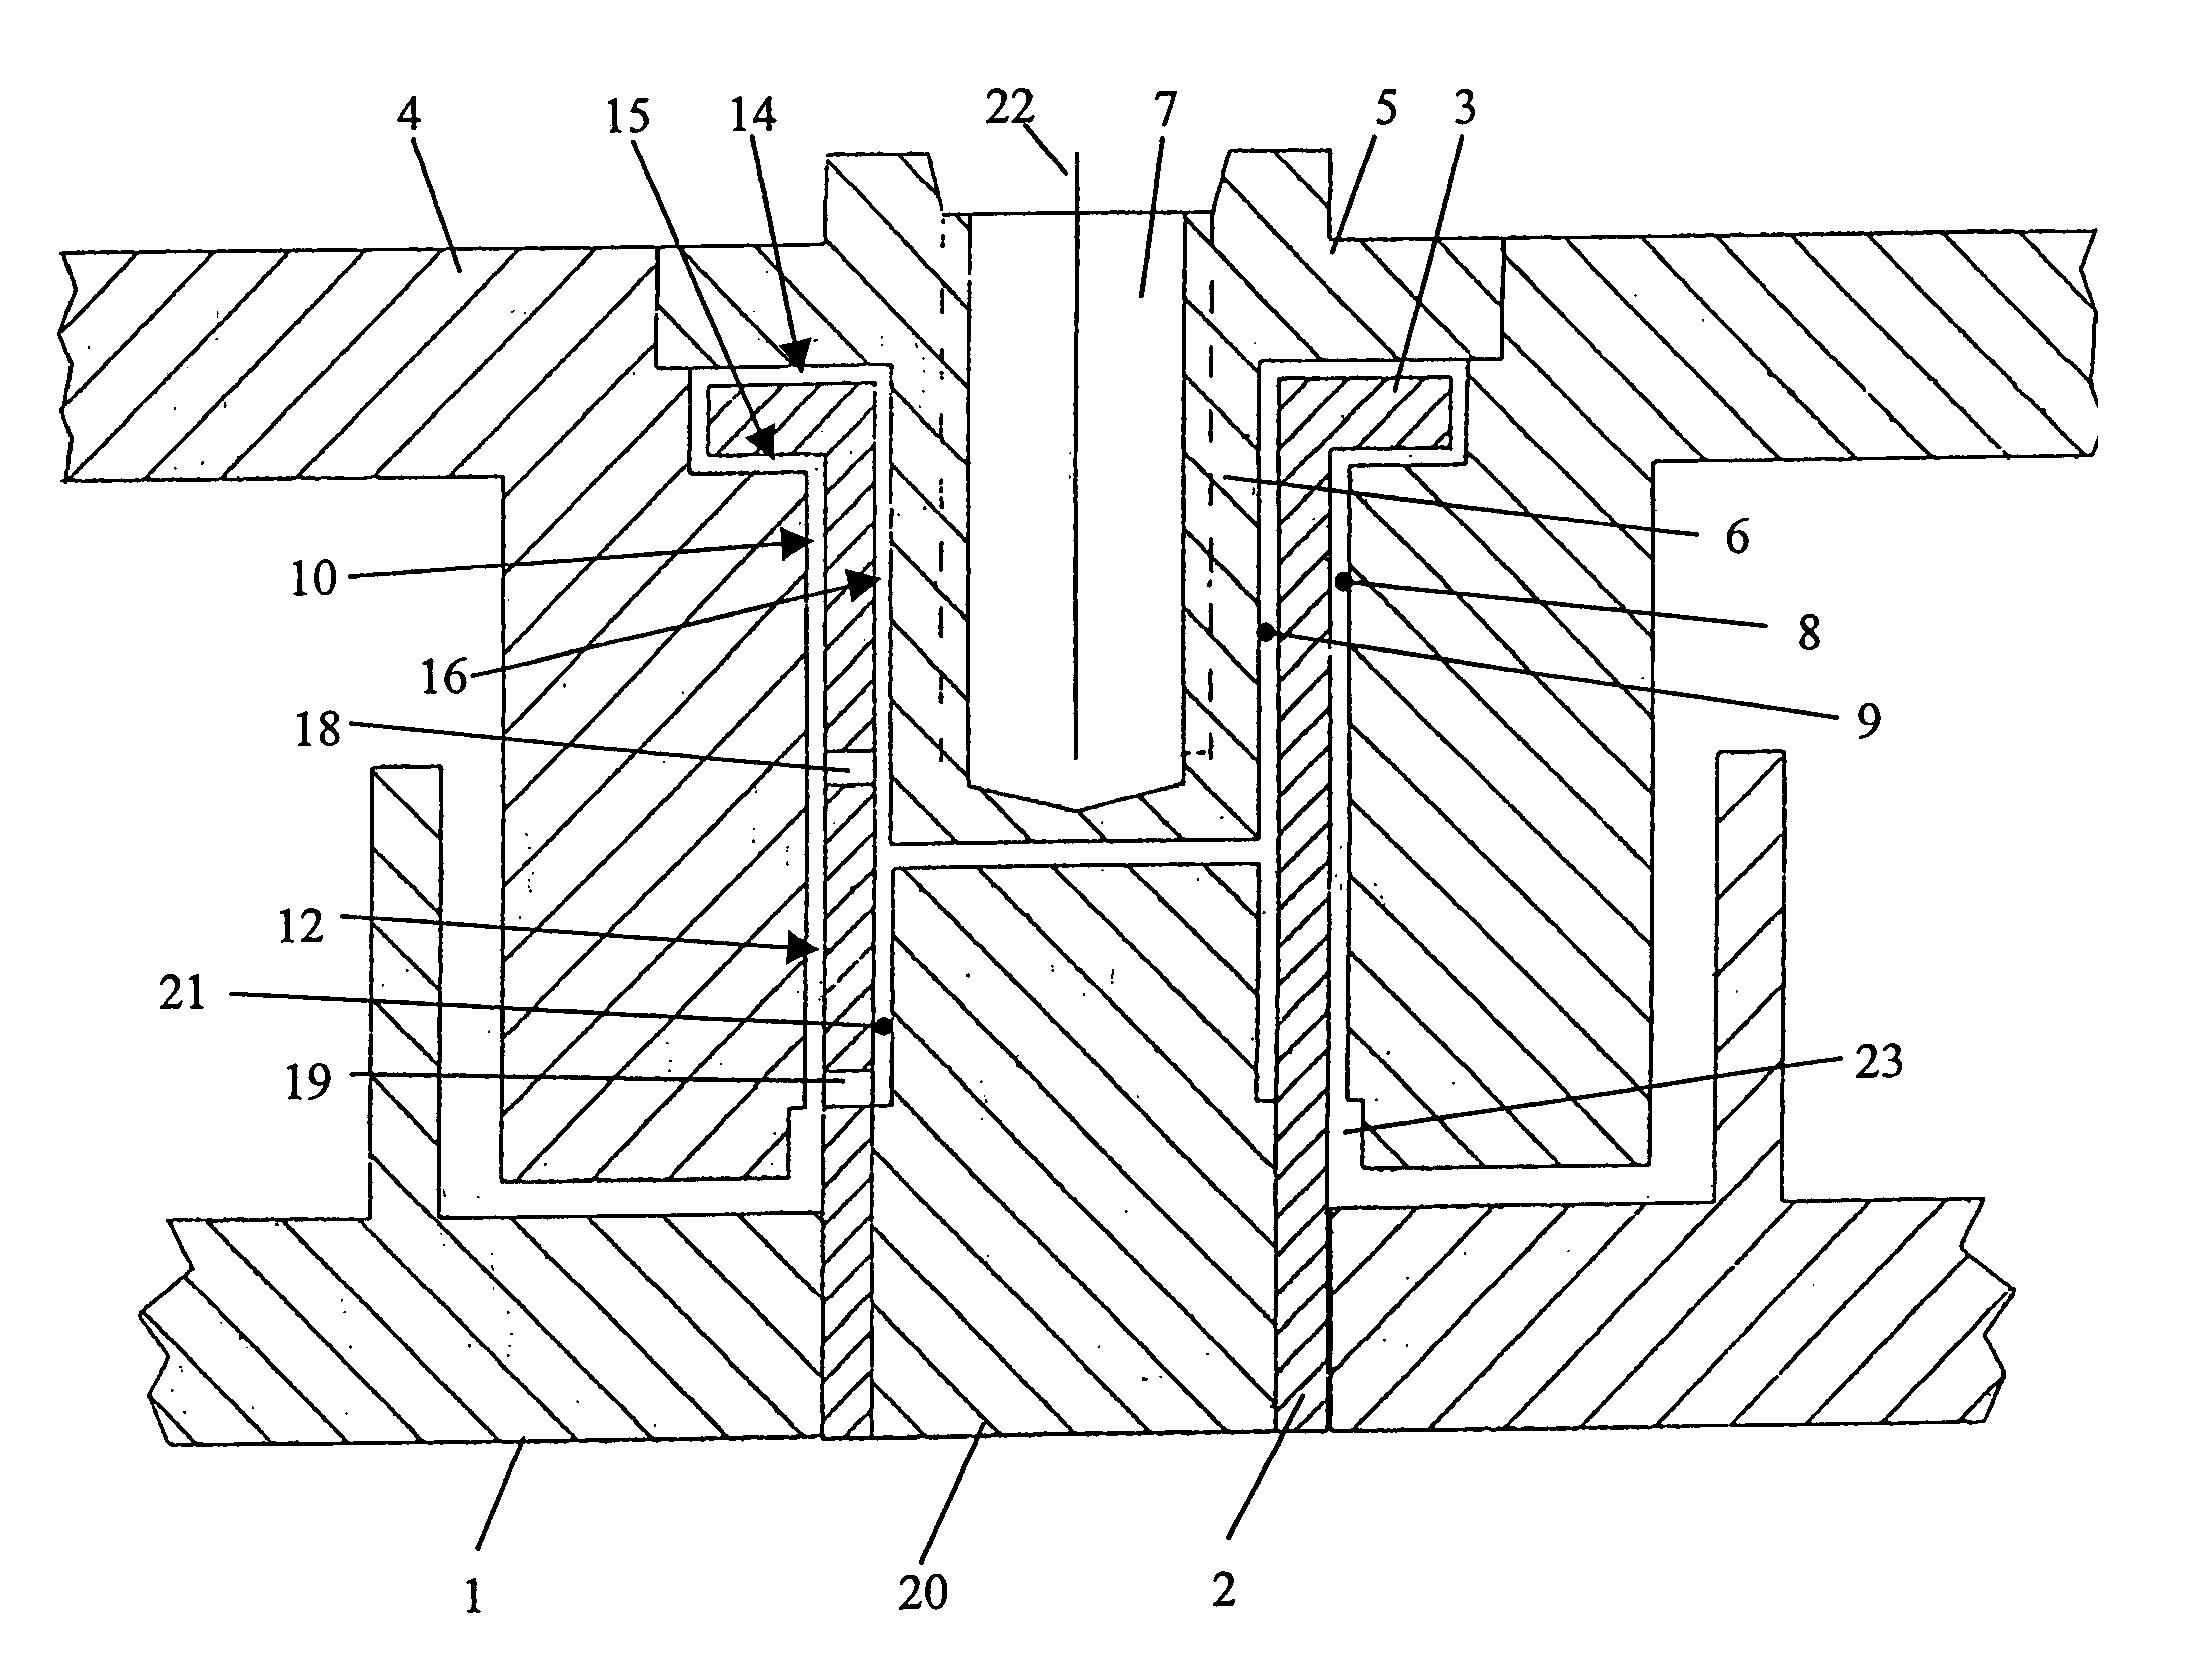 Fluid dynamic bearing system to rotatably support a spindle motor